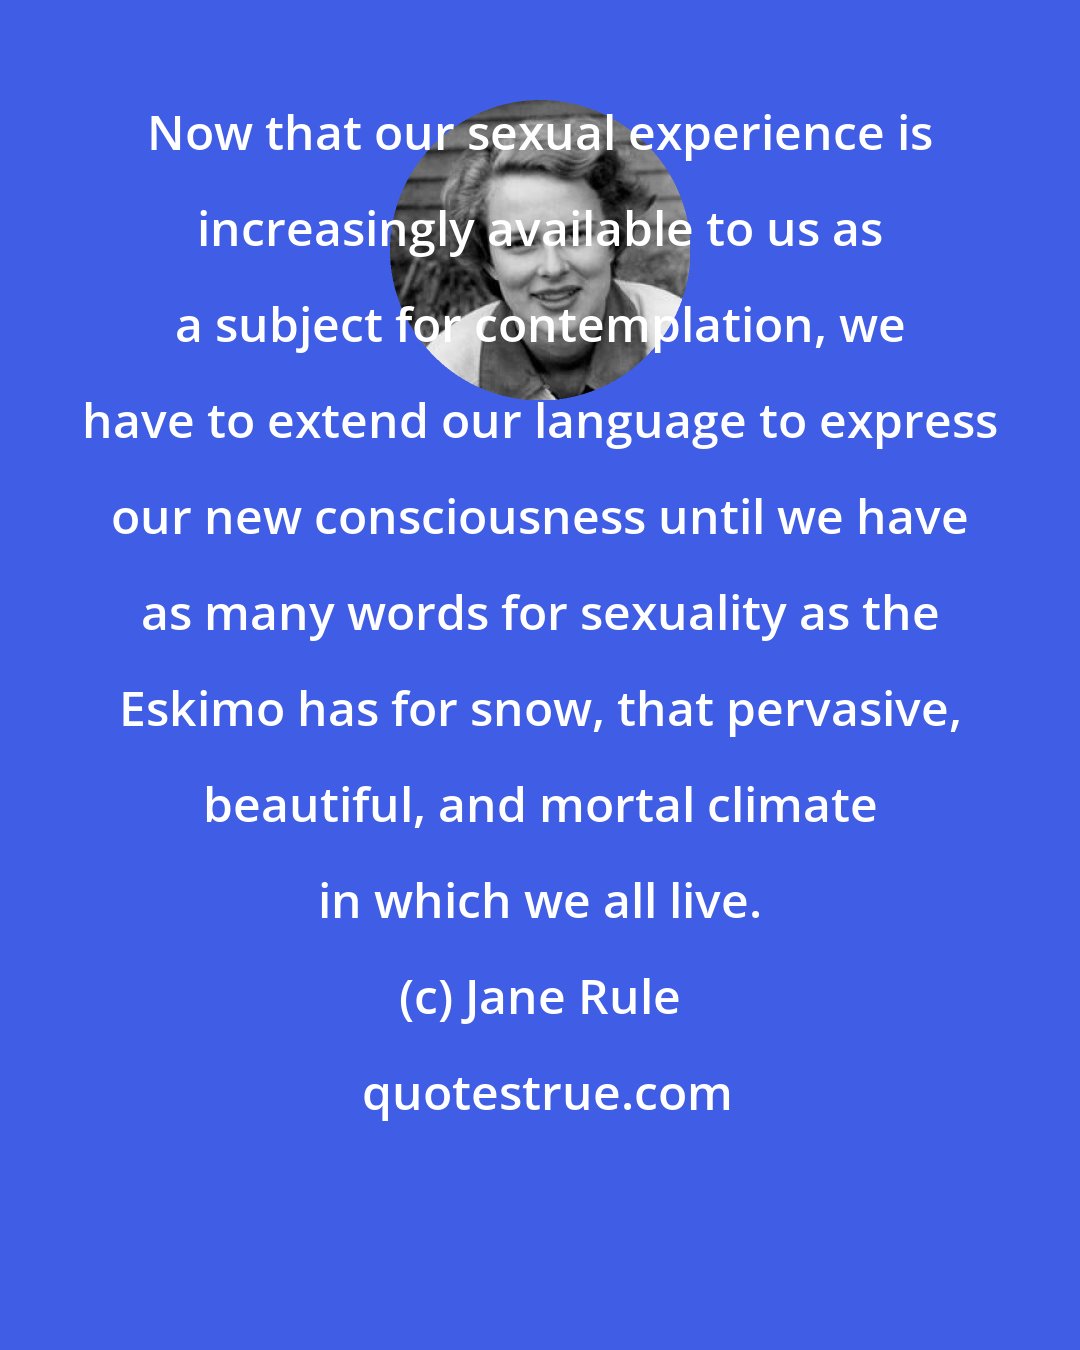 Jane Rule: Now that our sexual experience is increasingly available to us as a subject for contemplation, we have to extend our language to express our new consciousness until we have as many words for sexuality as the Eskimo has for snow, that pervasive, beautiful, and mortal climate in which we all live.